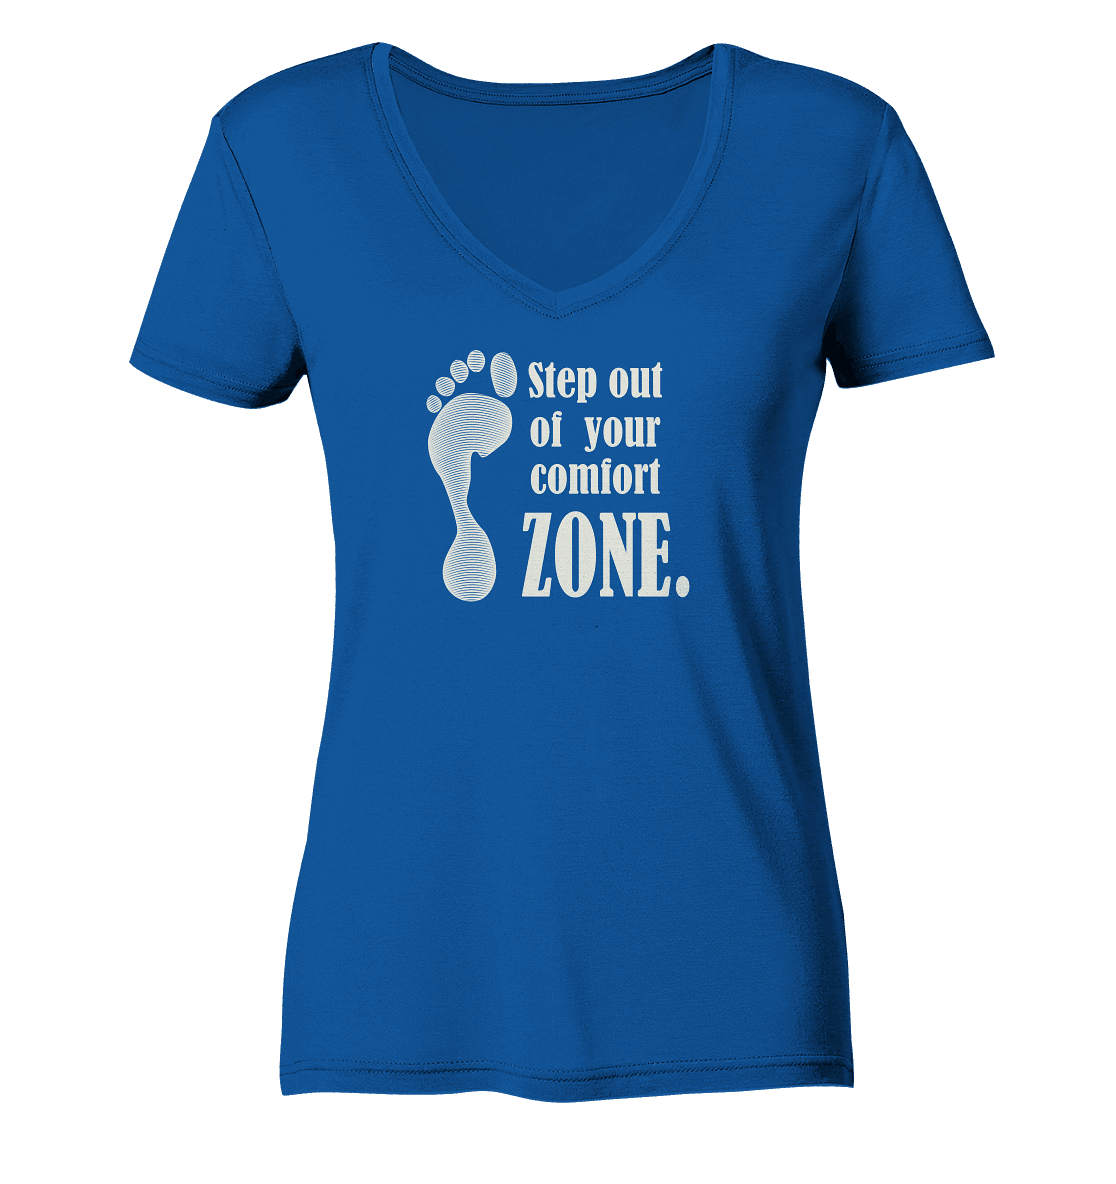 step out of your comfort zone - Ladies Organic V-Neck Shirt